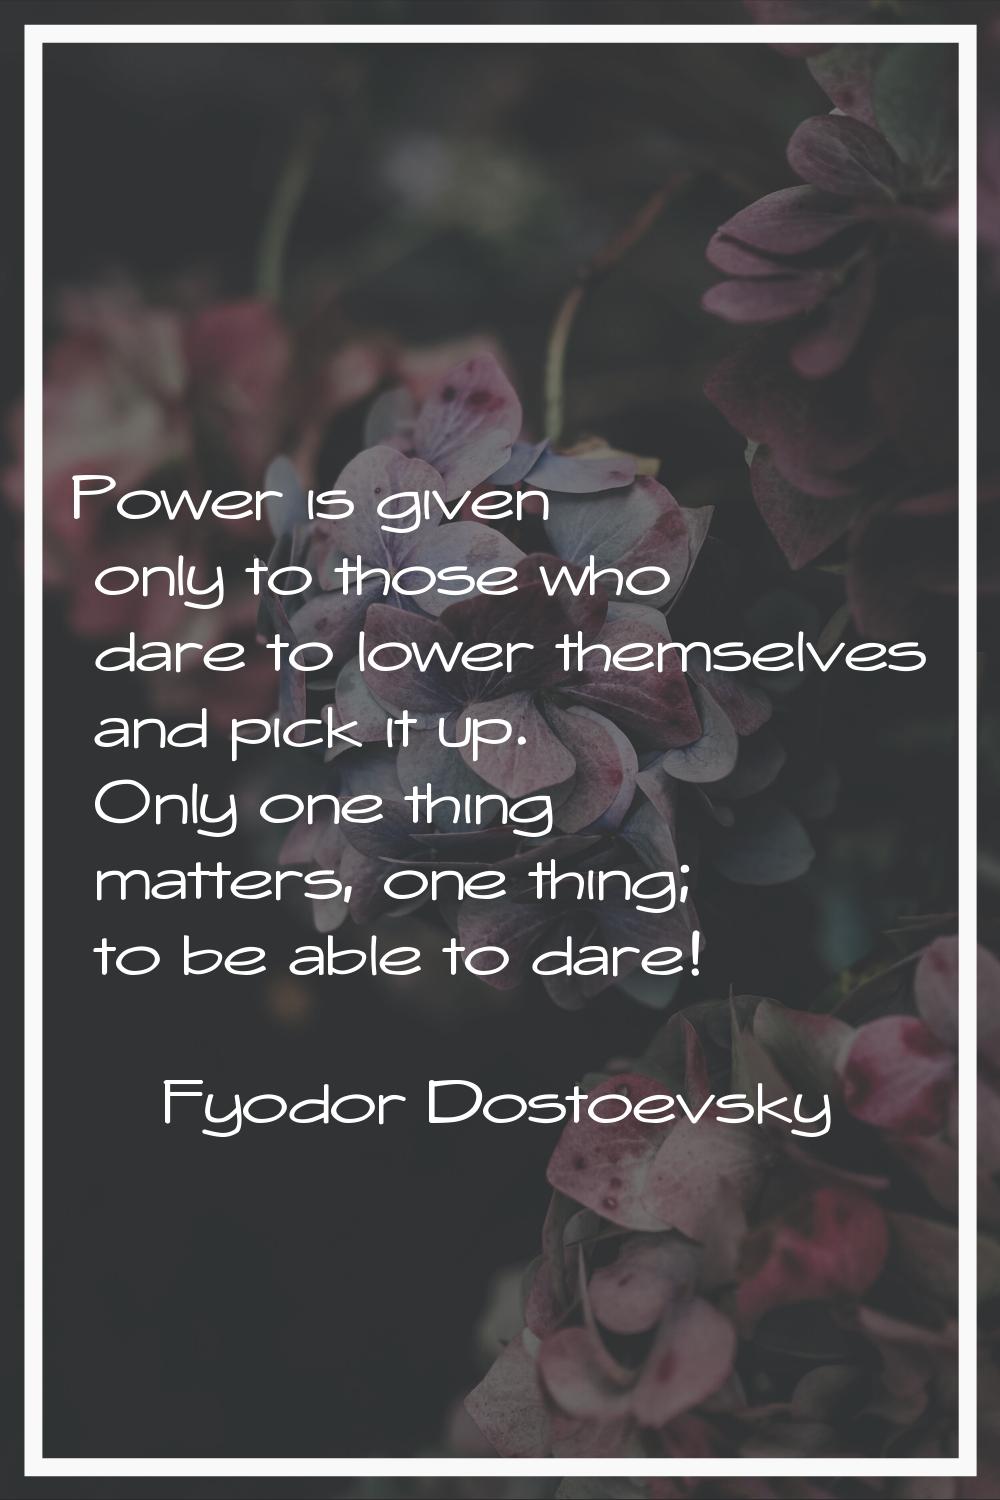 Power is given only to those who dare to lower themselves and pick it up. Only one thing matters, o